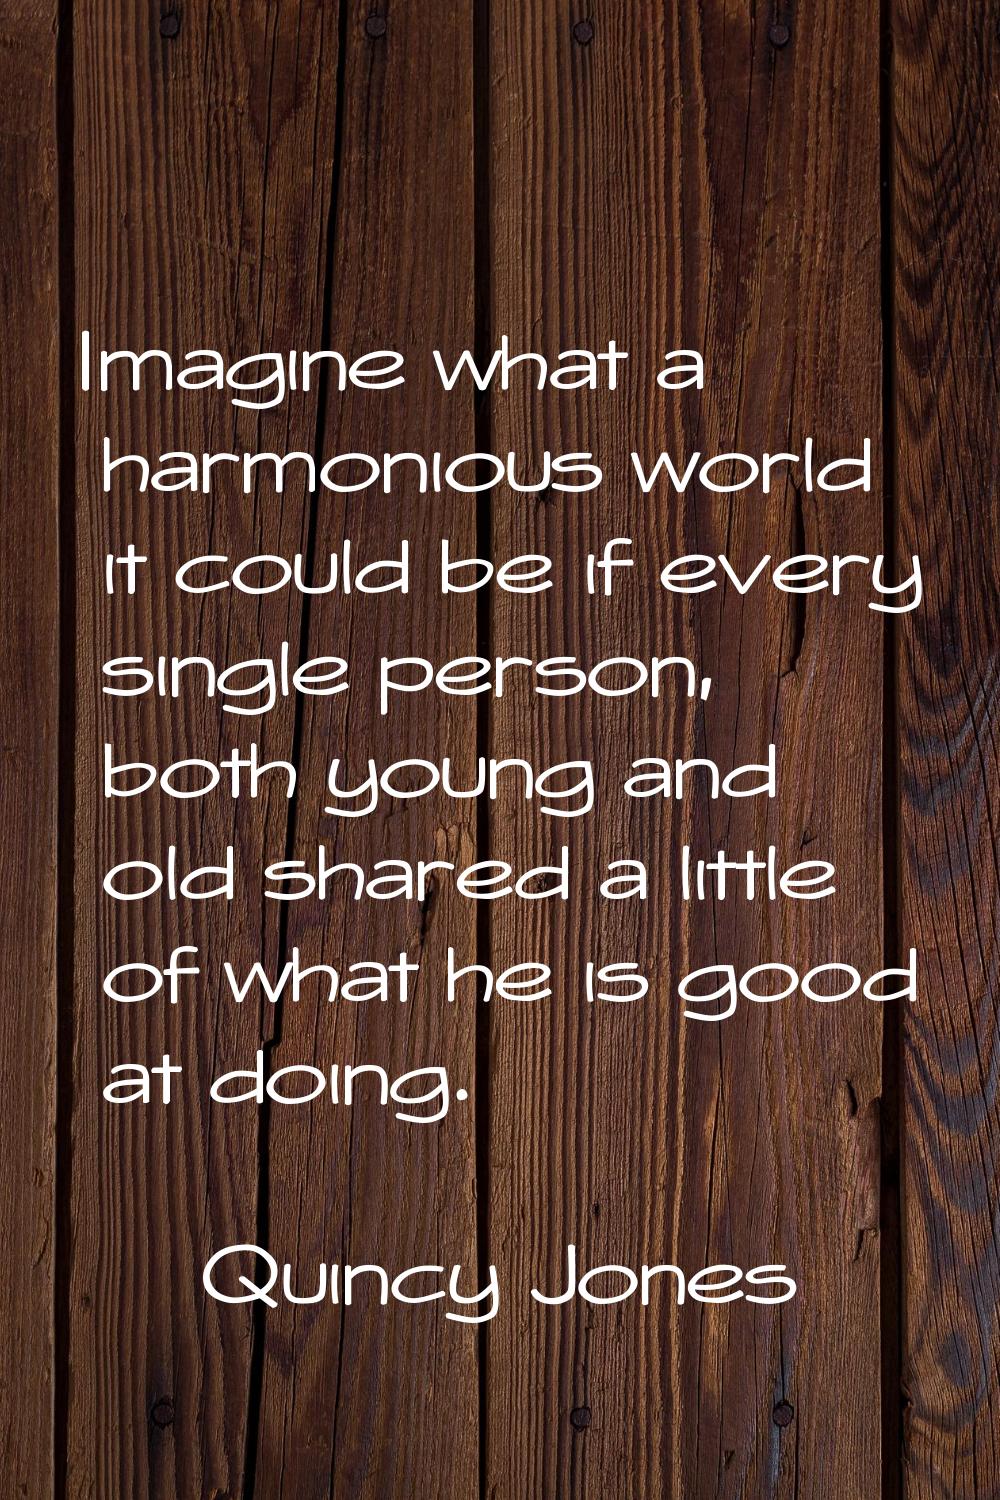 Imagine what a harmonious world it could be if every single person, both young and old shared a lit